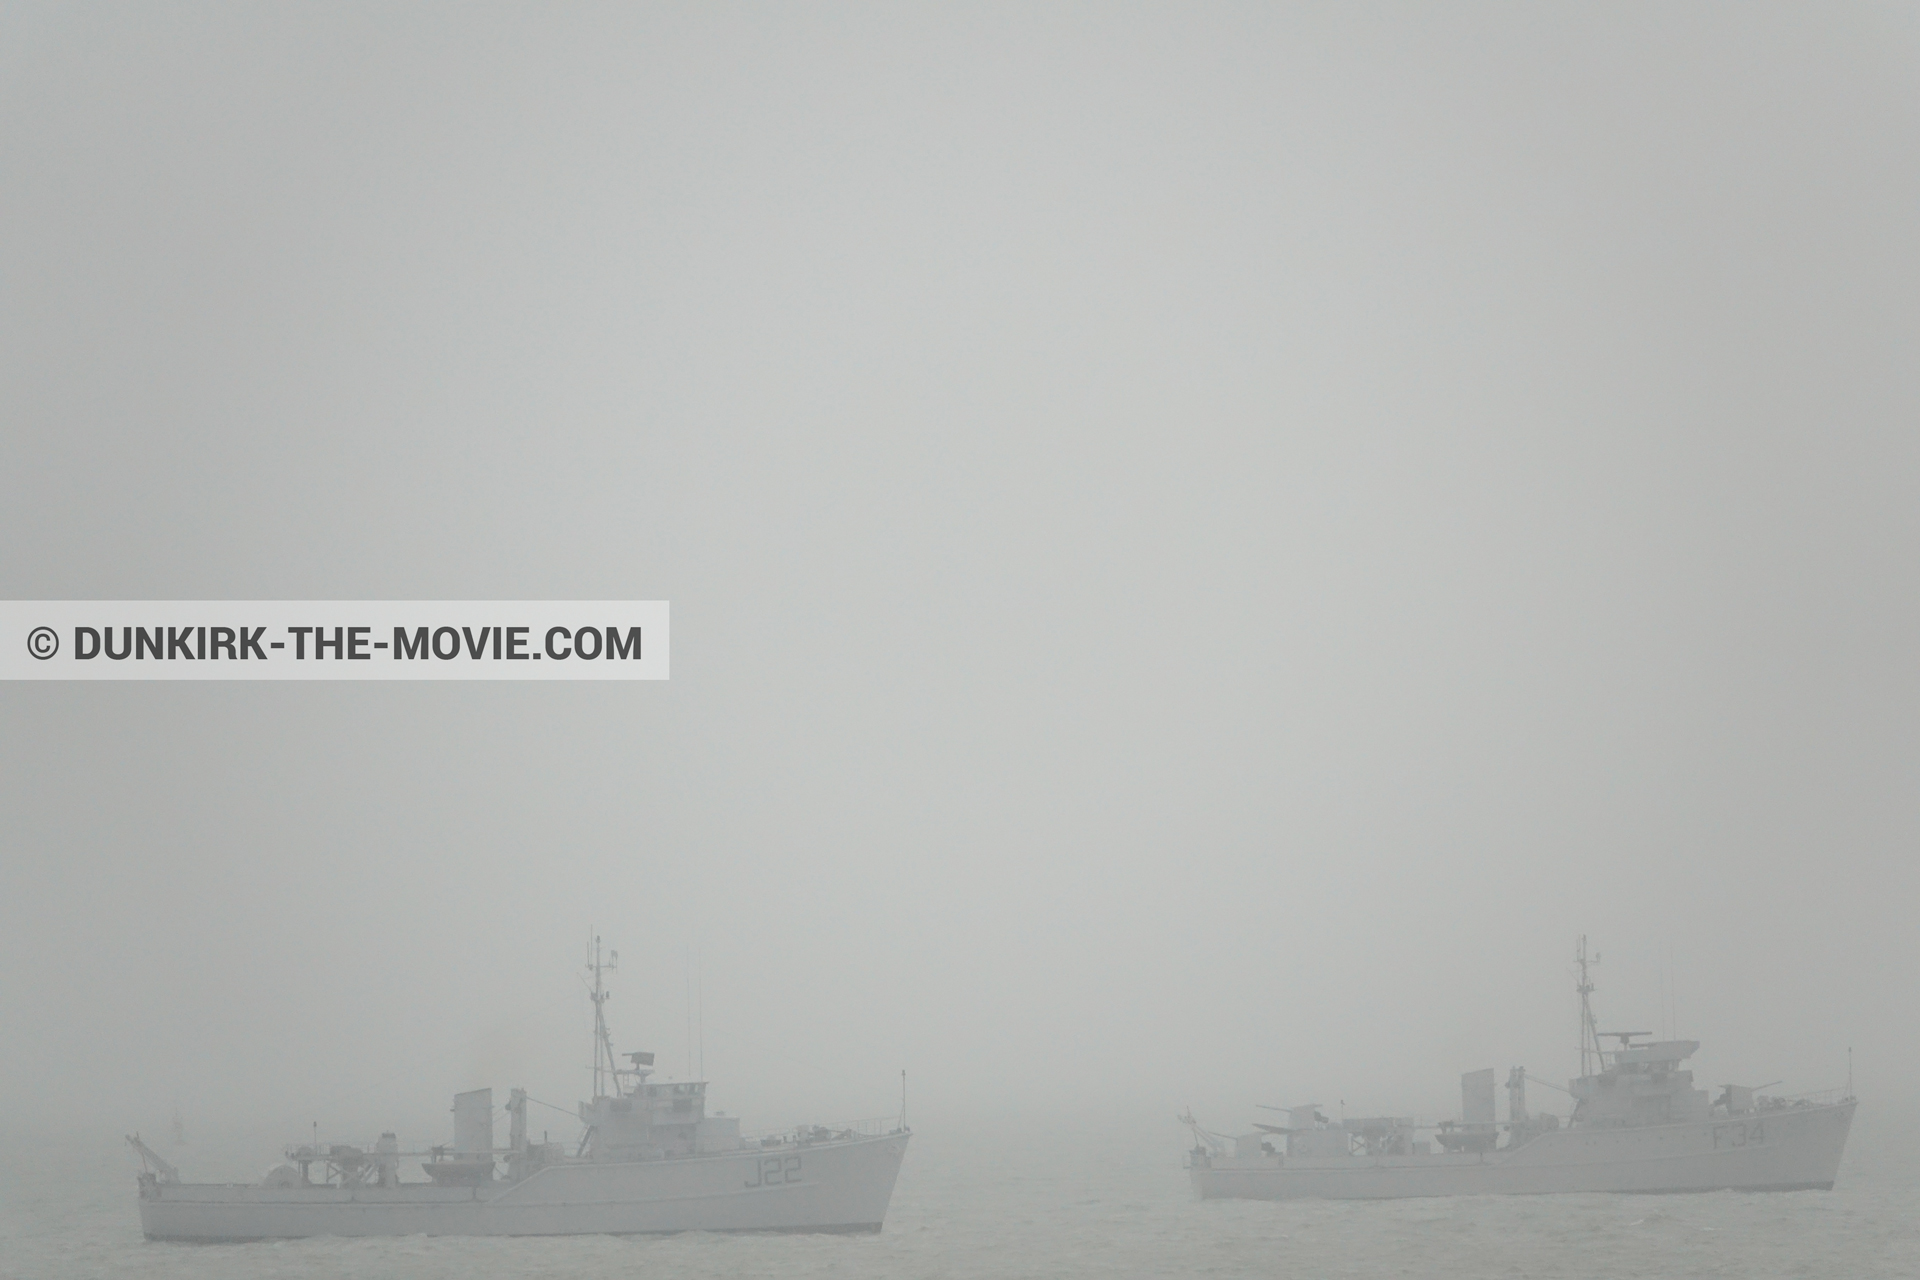 Picture with grey sky, F34 - Hr.Ms. Sittard, J22 -Hr.Ms. Naaldwijk, calm sea,  from behind the scene of the Dunkirk movie by Nolan